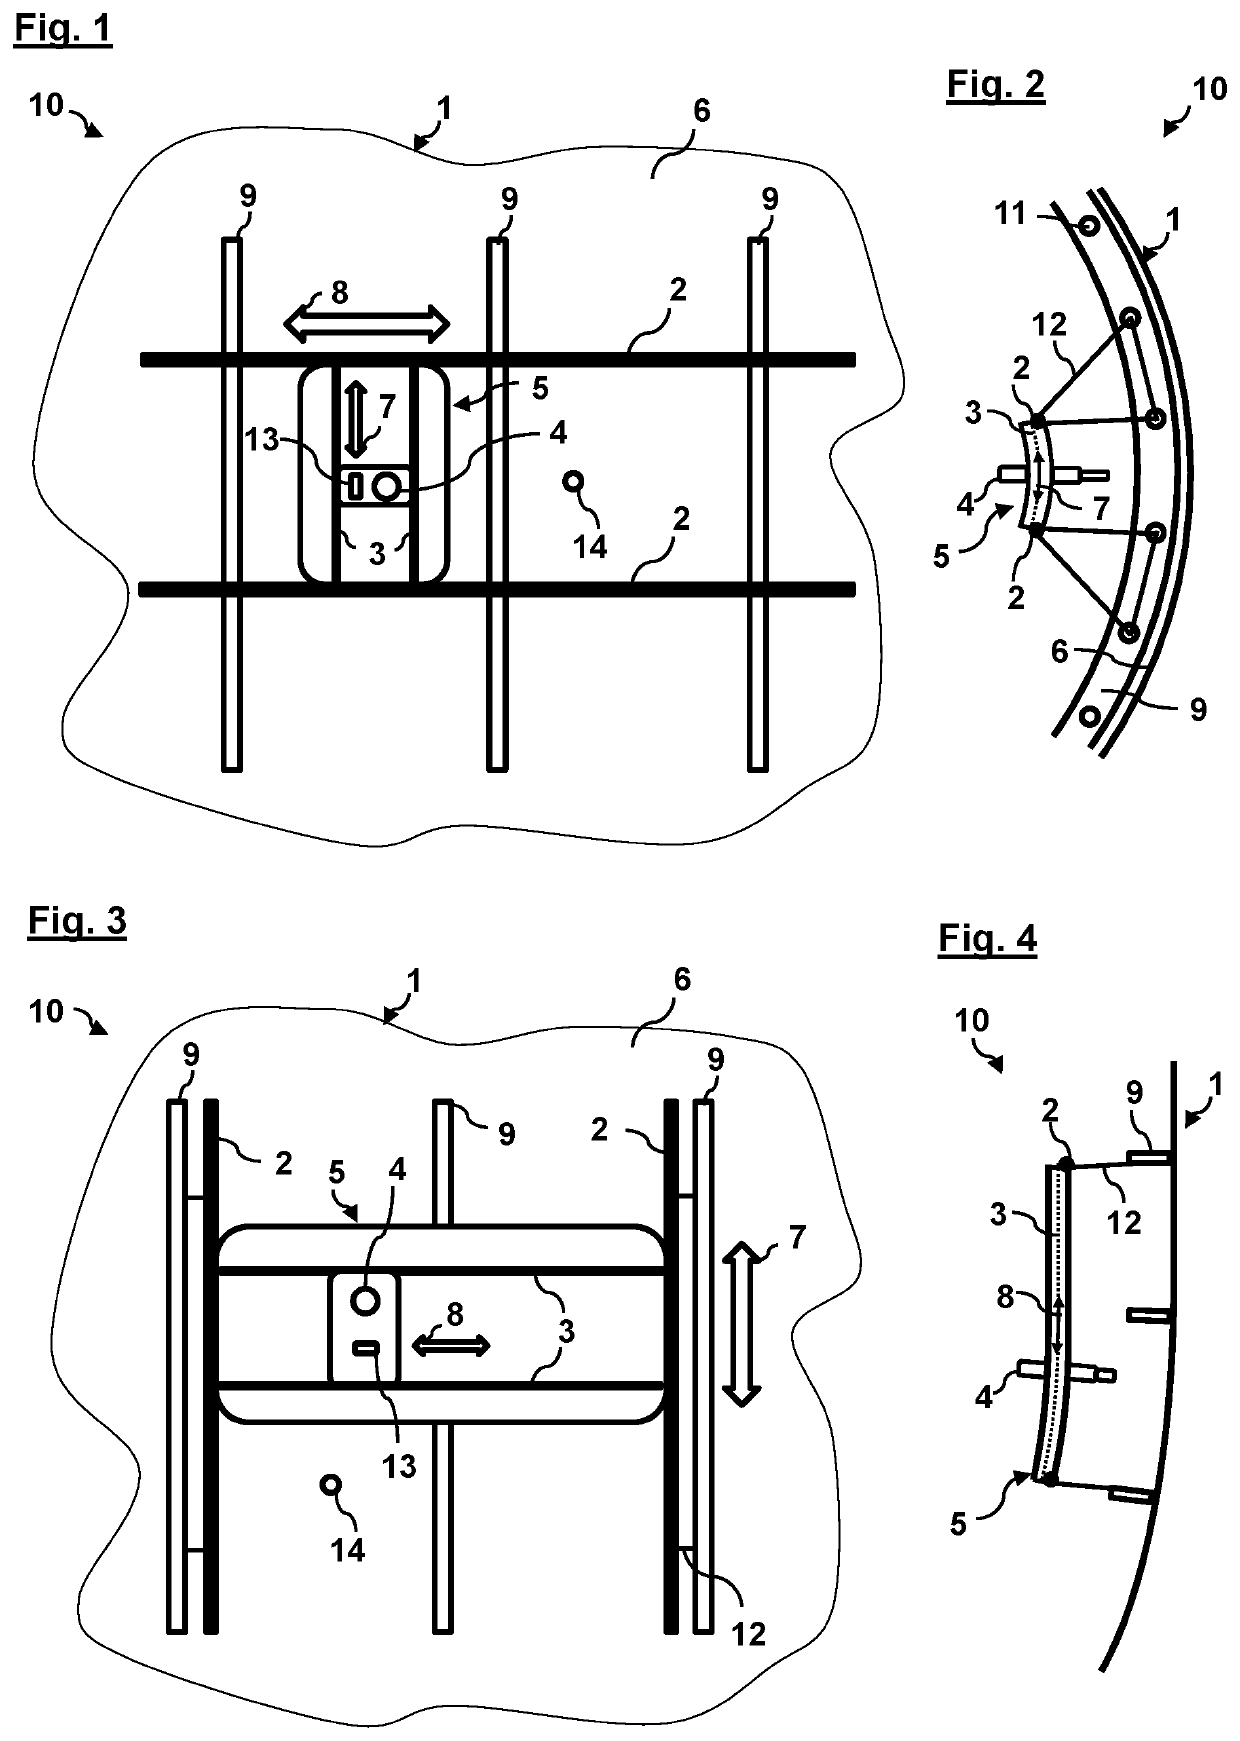 Assembly System For An Automated Internal Assembly Of An Aircraft Fuselage